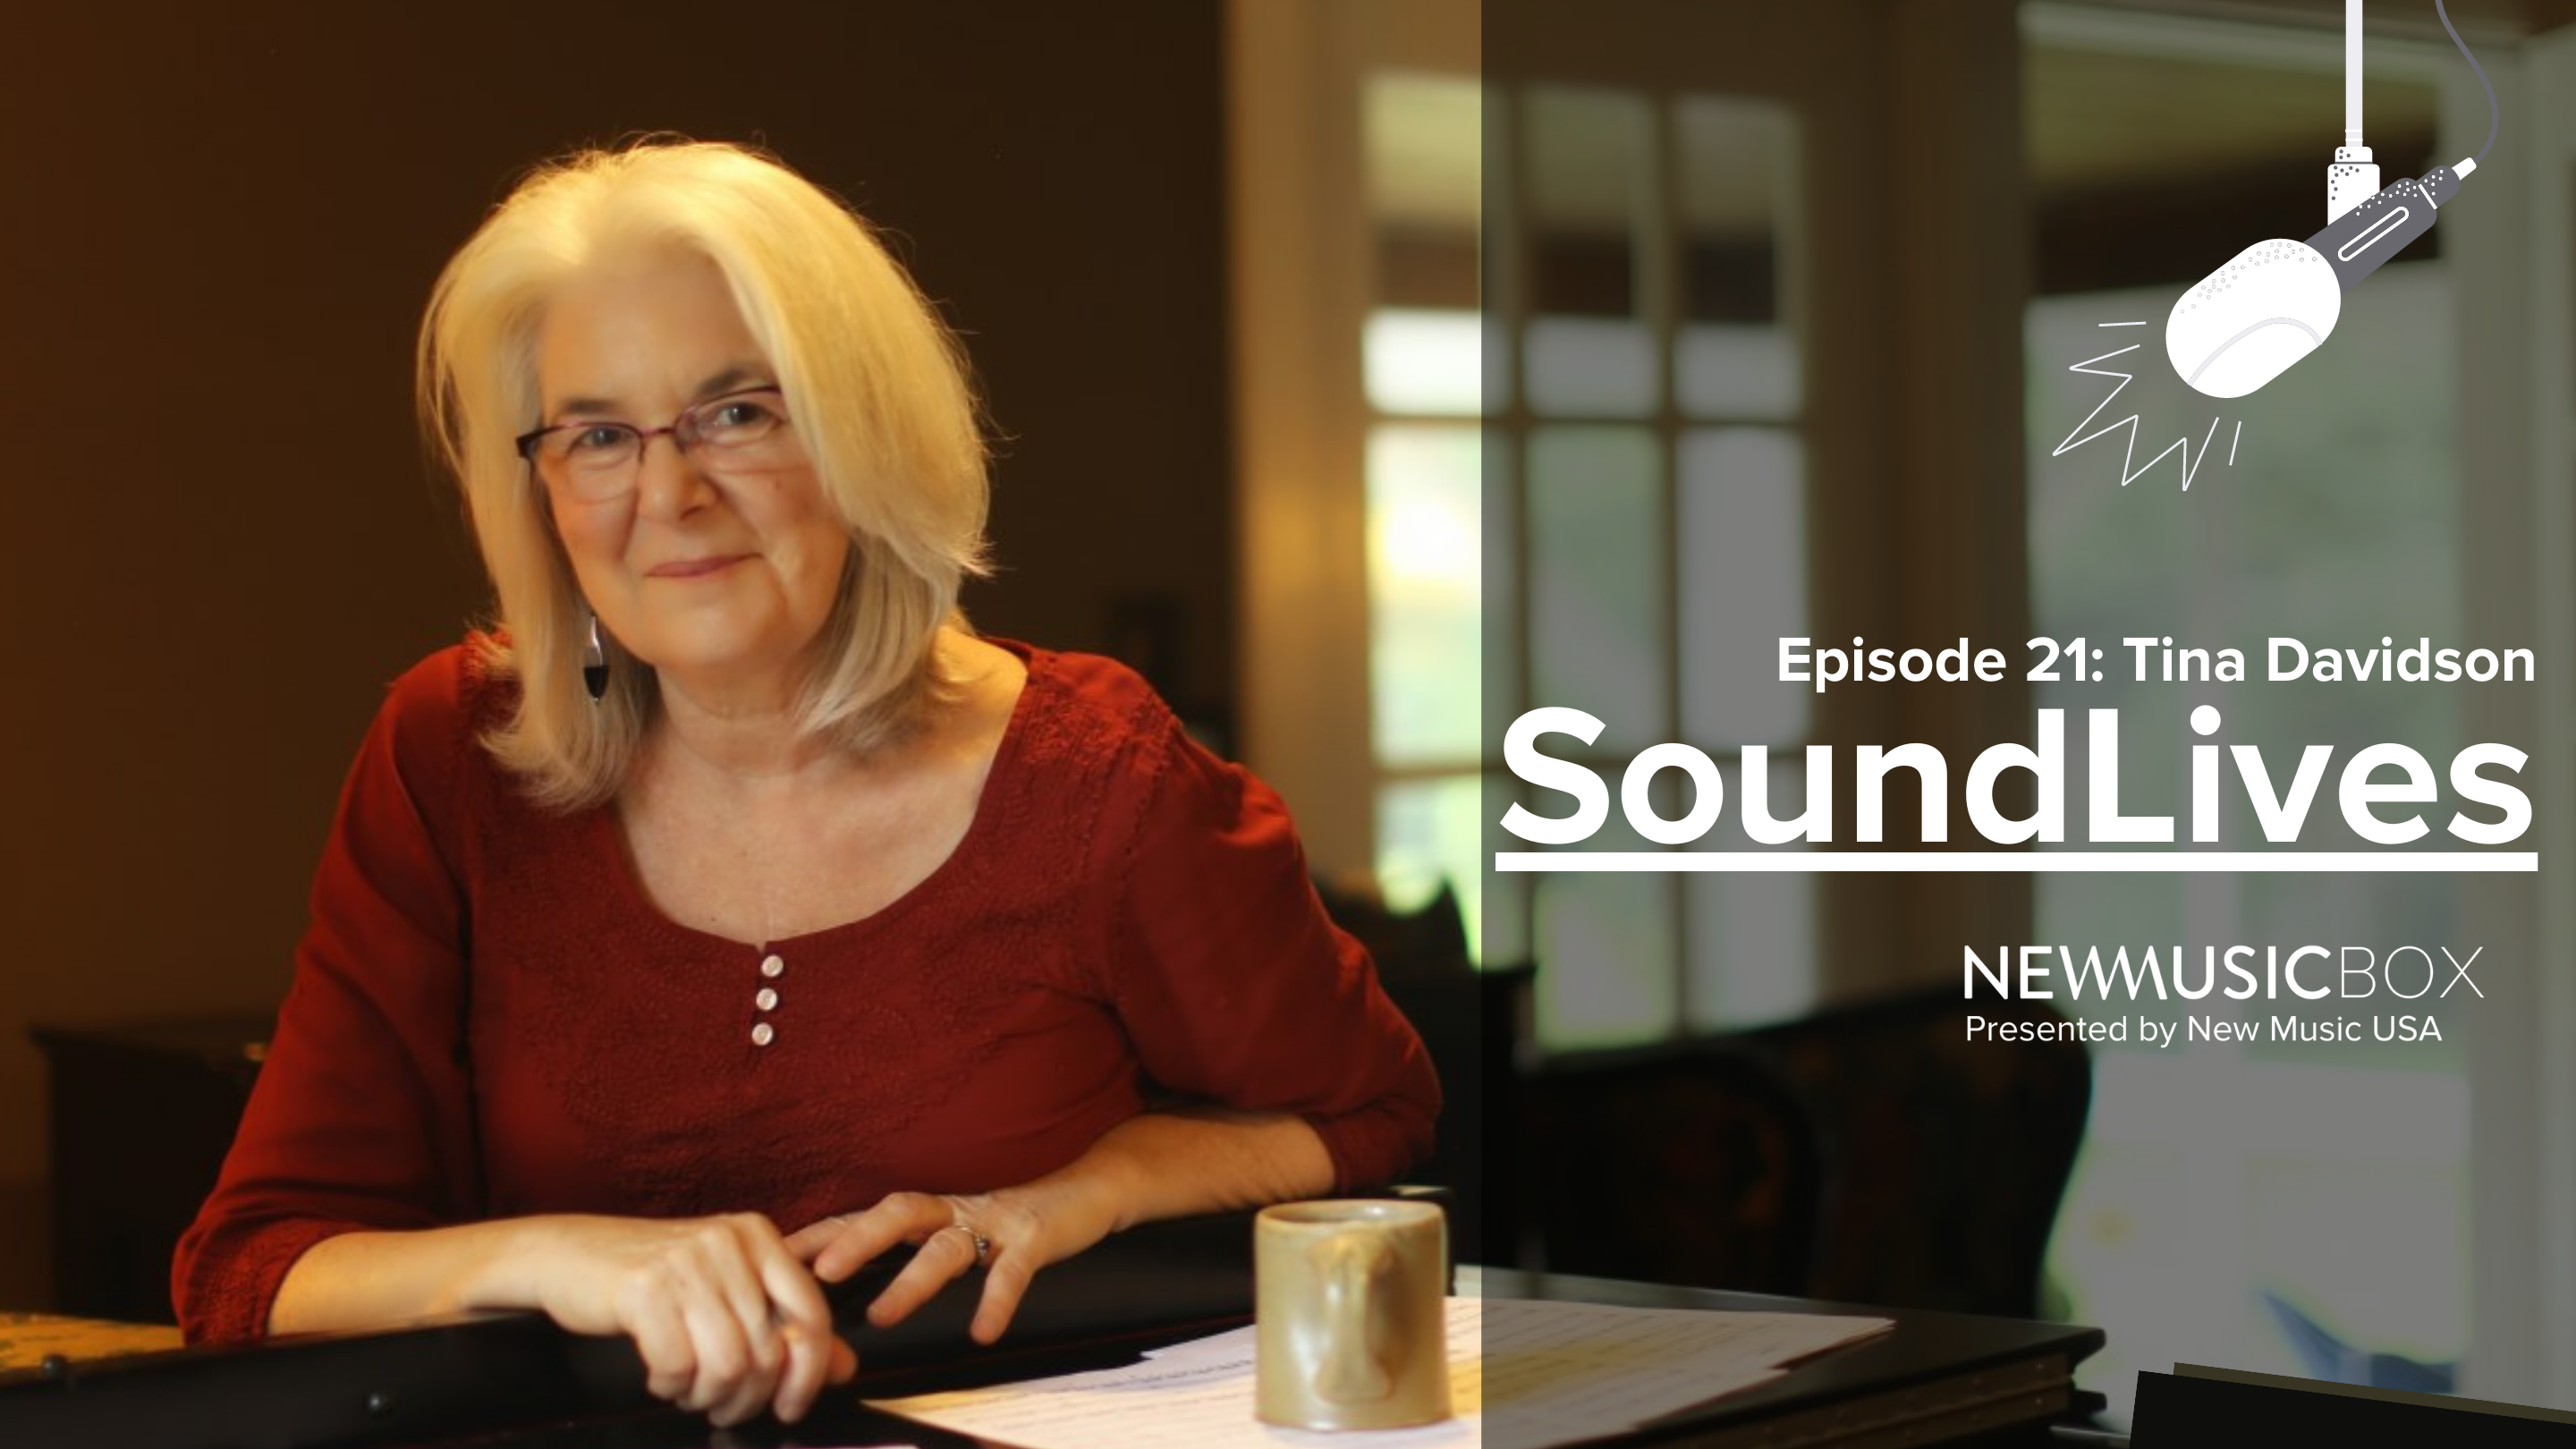 Photo of Tina Davidson sitting at a desk with an overlay of the SoundLives logo